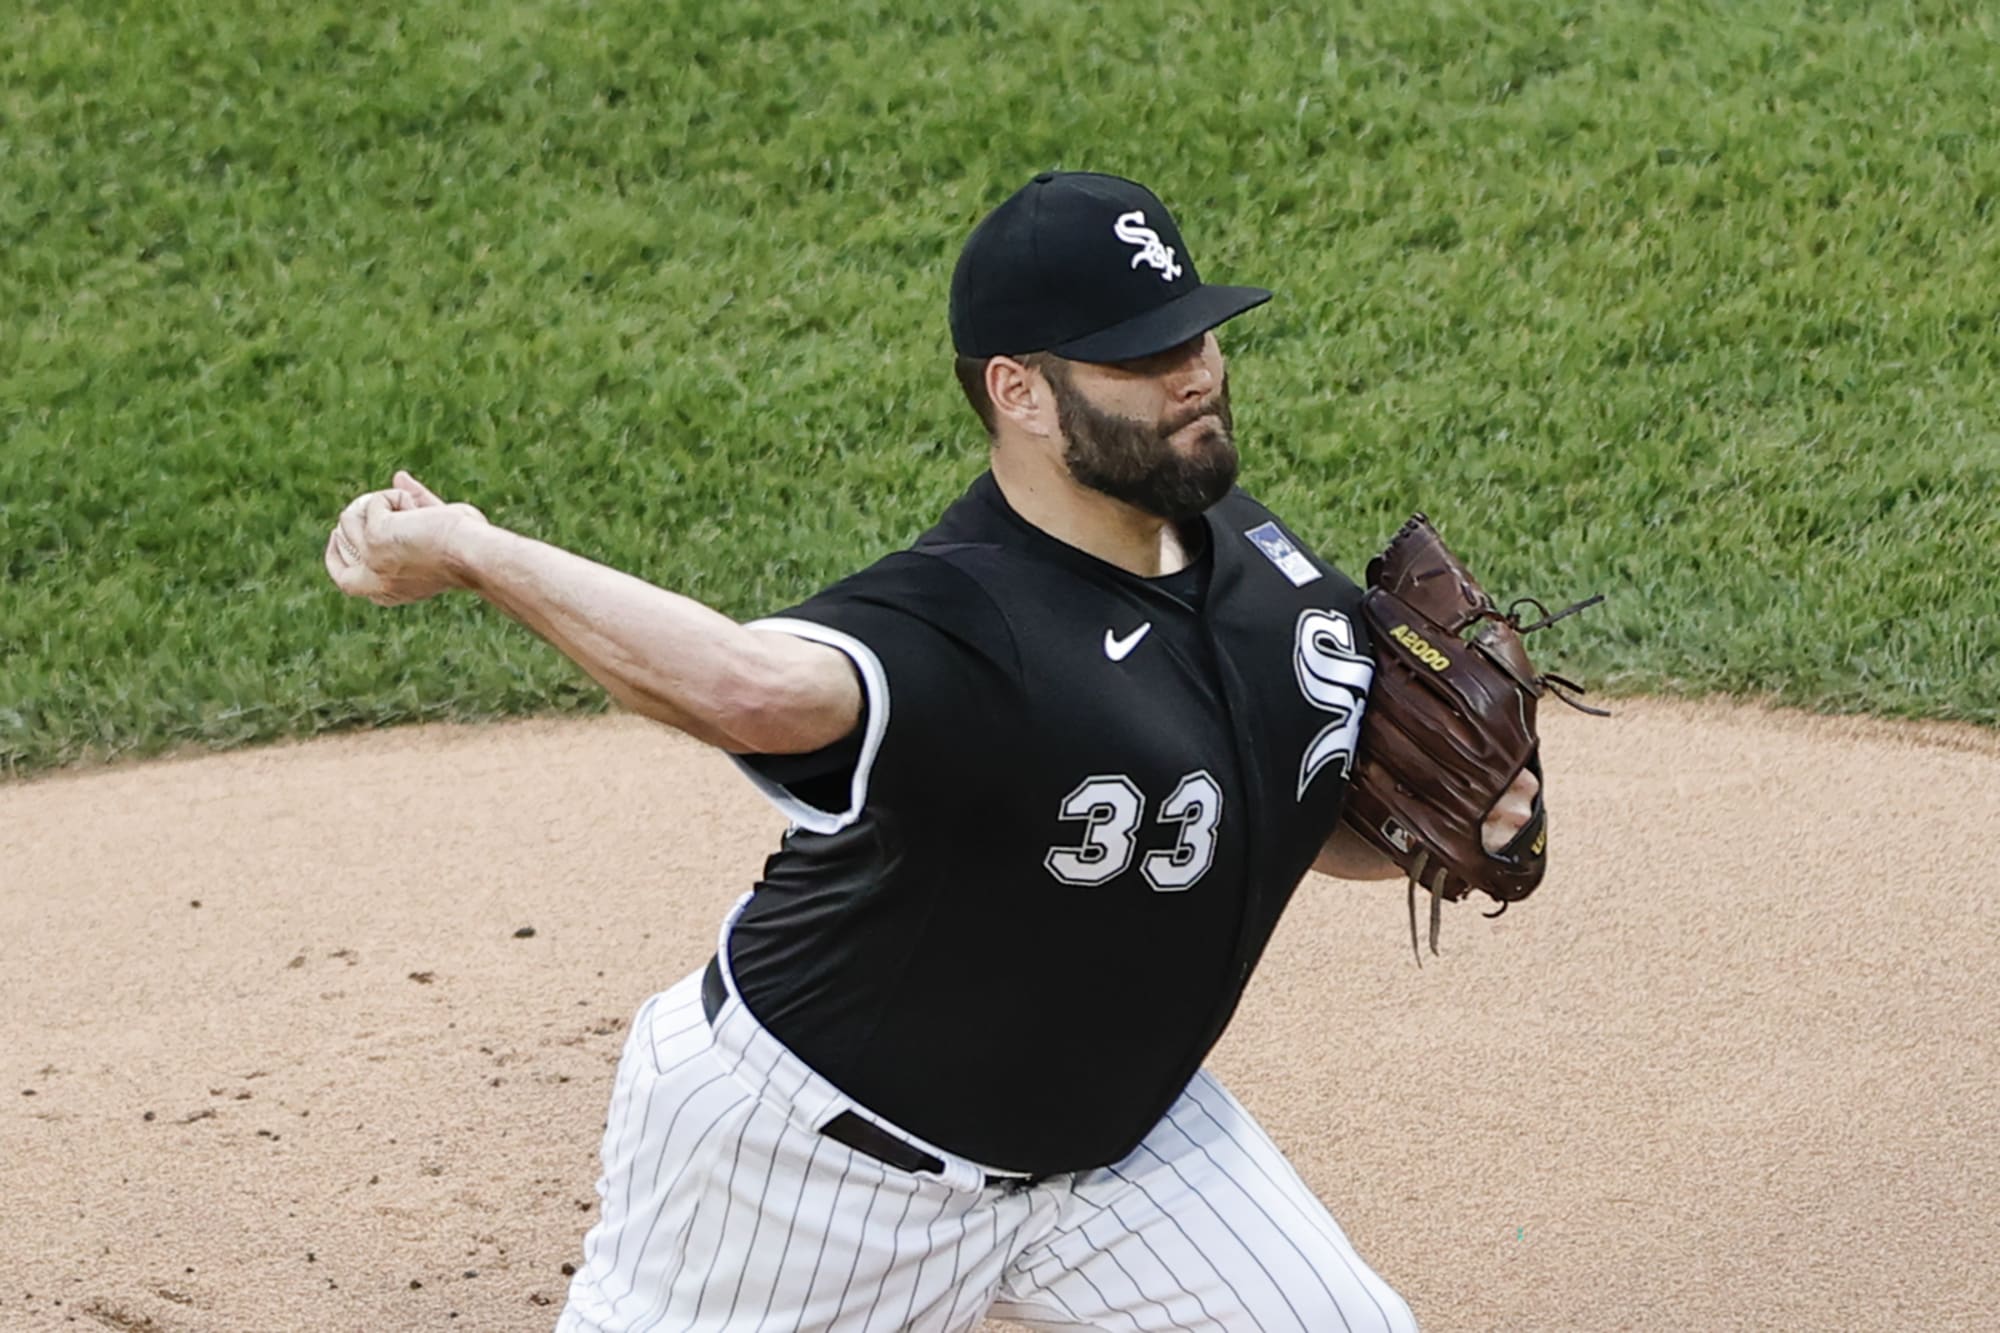 Los Angeles Dodgers Acquire Lance Lynn in Blockbuster Trade with Chicago  White Sox - BVM Sports